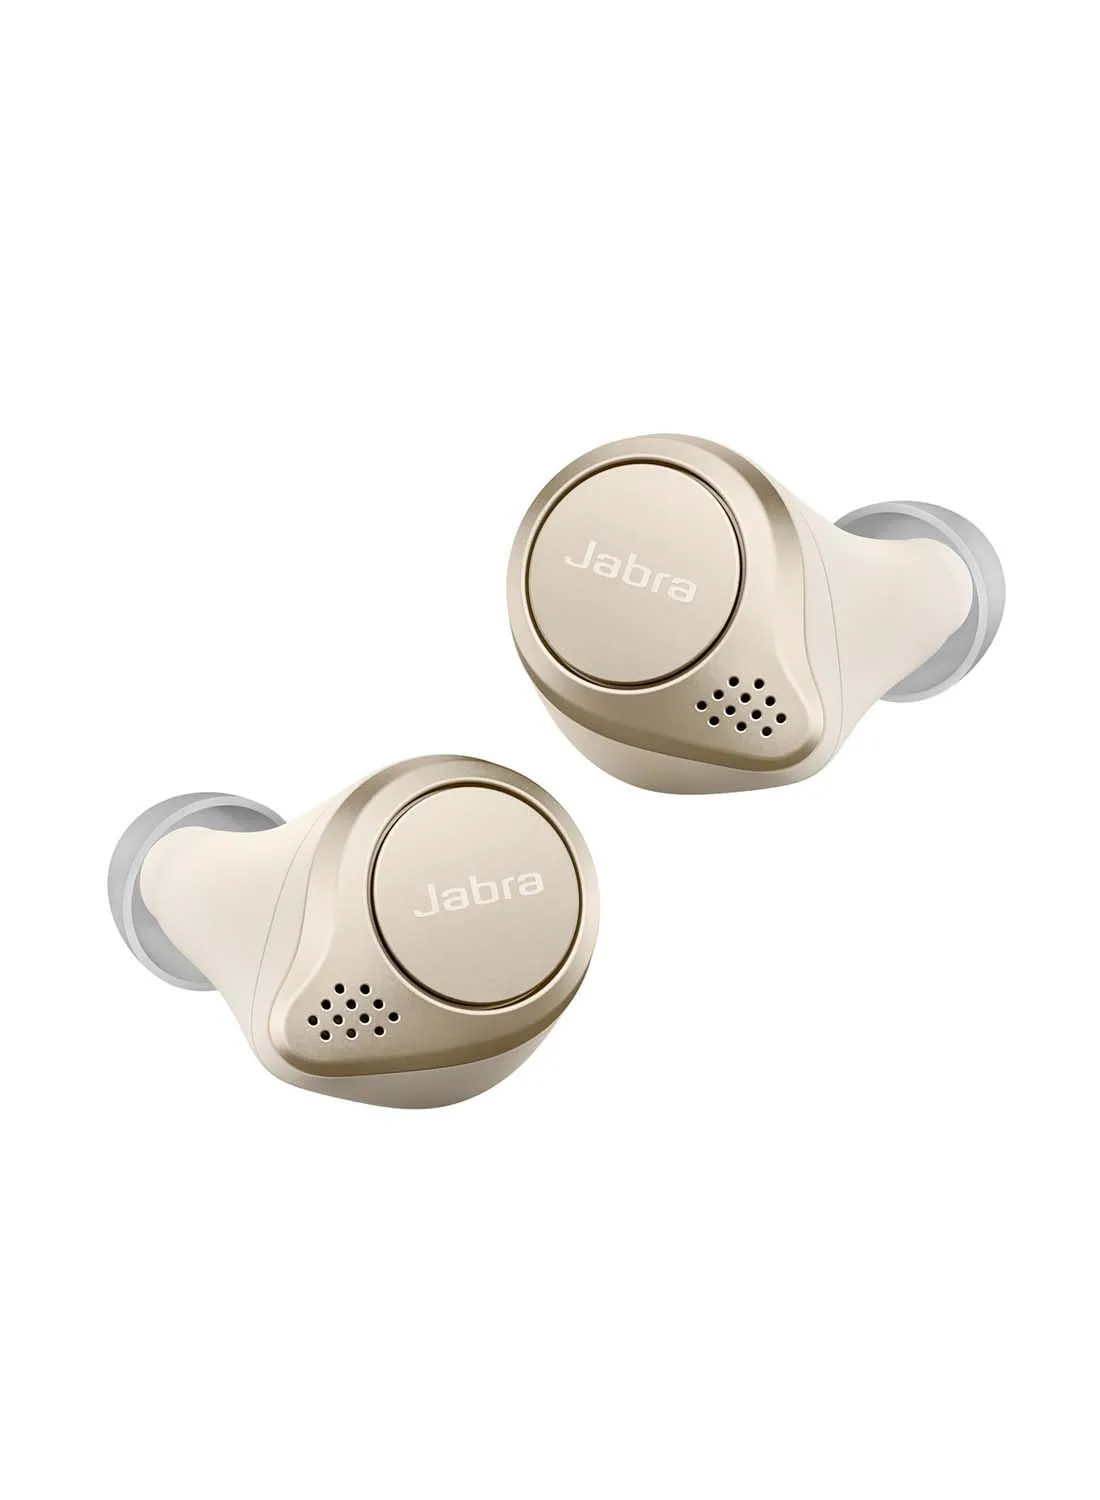 Jabra Elite 75t Earbuds – Active Noise Cancelling Bluetooth Headphones with Long Battery Life For True Wireless Calls and Music Gold Beige